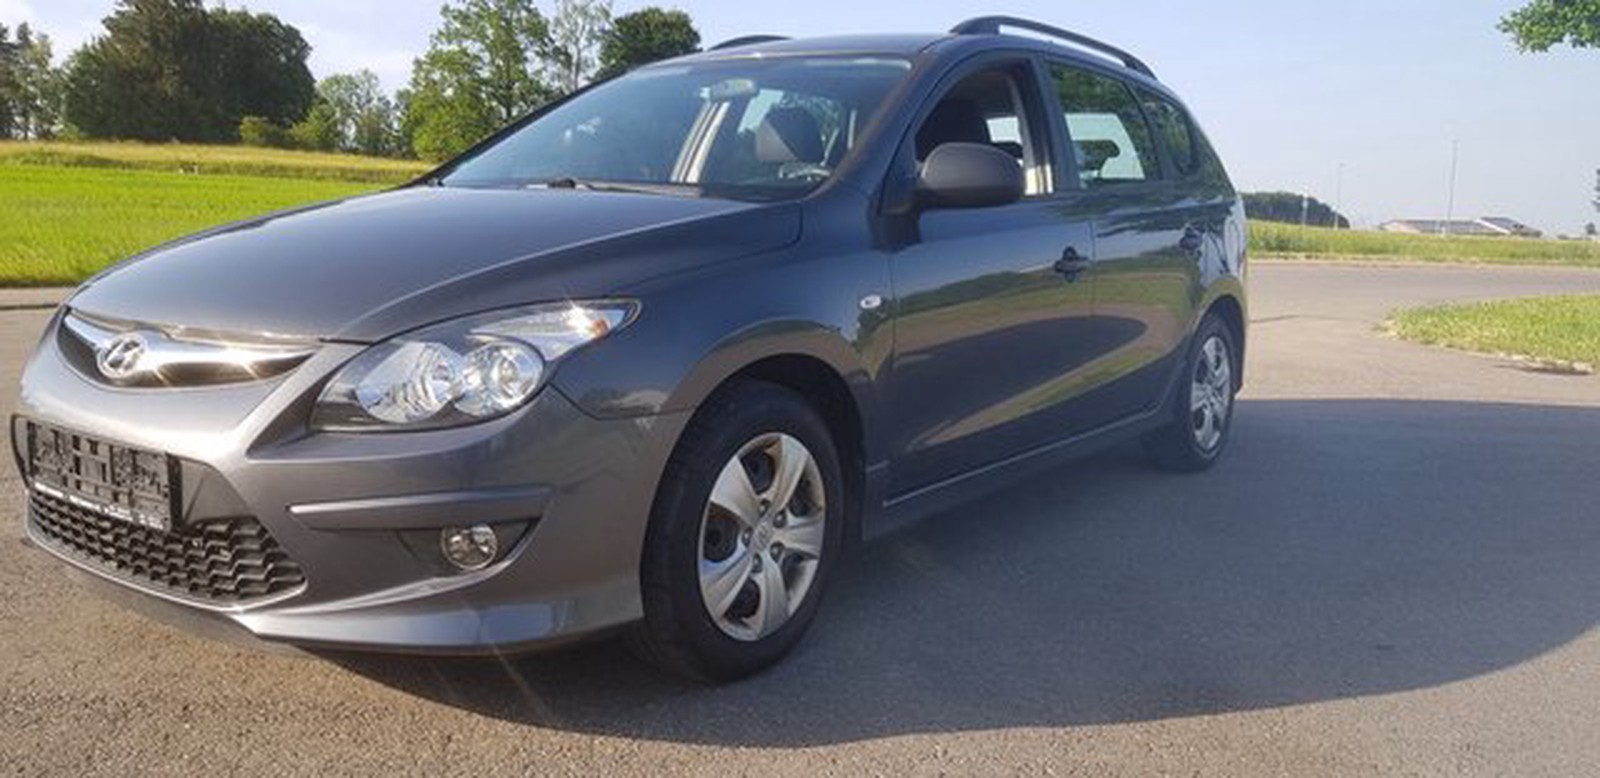 Hyundai I30 Cw Classic Used Buy In Zimmern Ob Rottweil Price 4900 Eur Int Nr 584 Sold